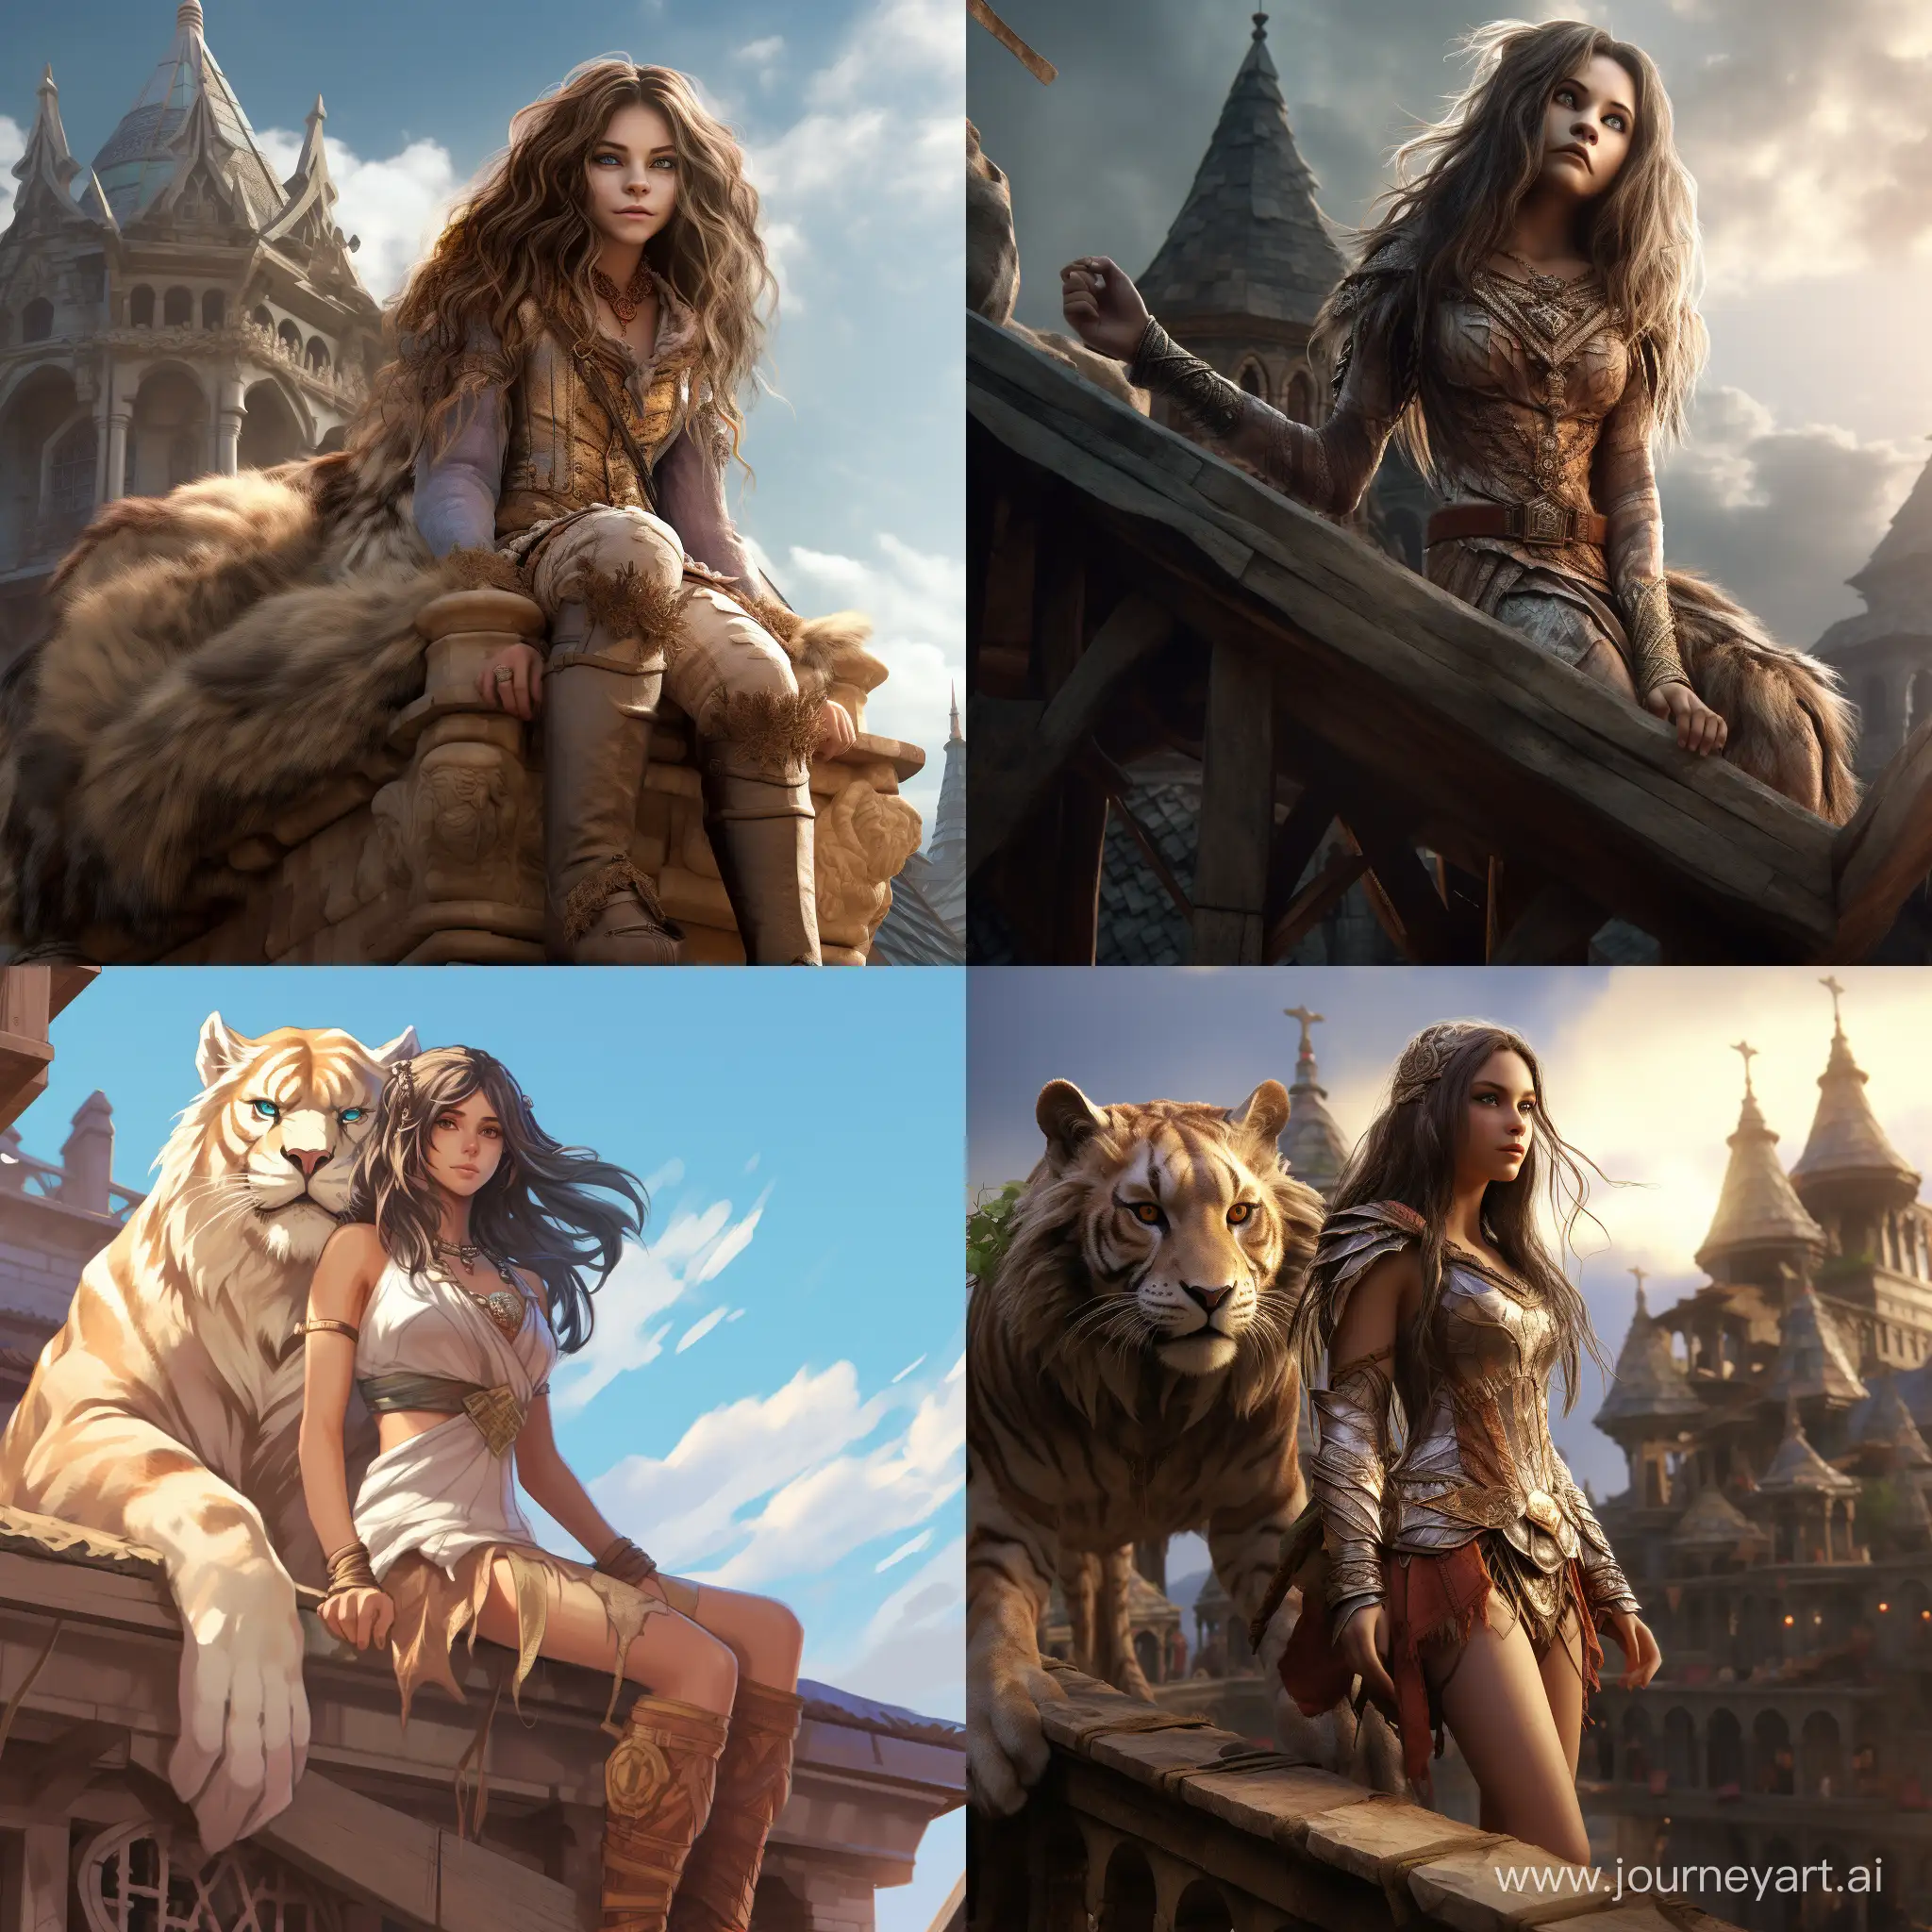 A half-tiger, half-furry girl stands on the roof of a house in a medieval city.